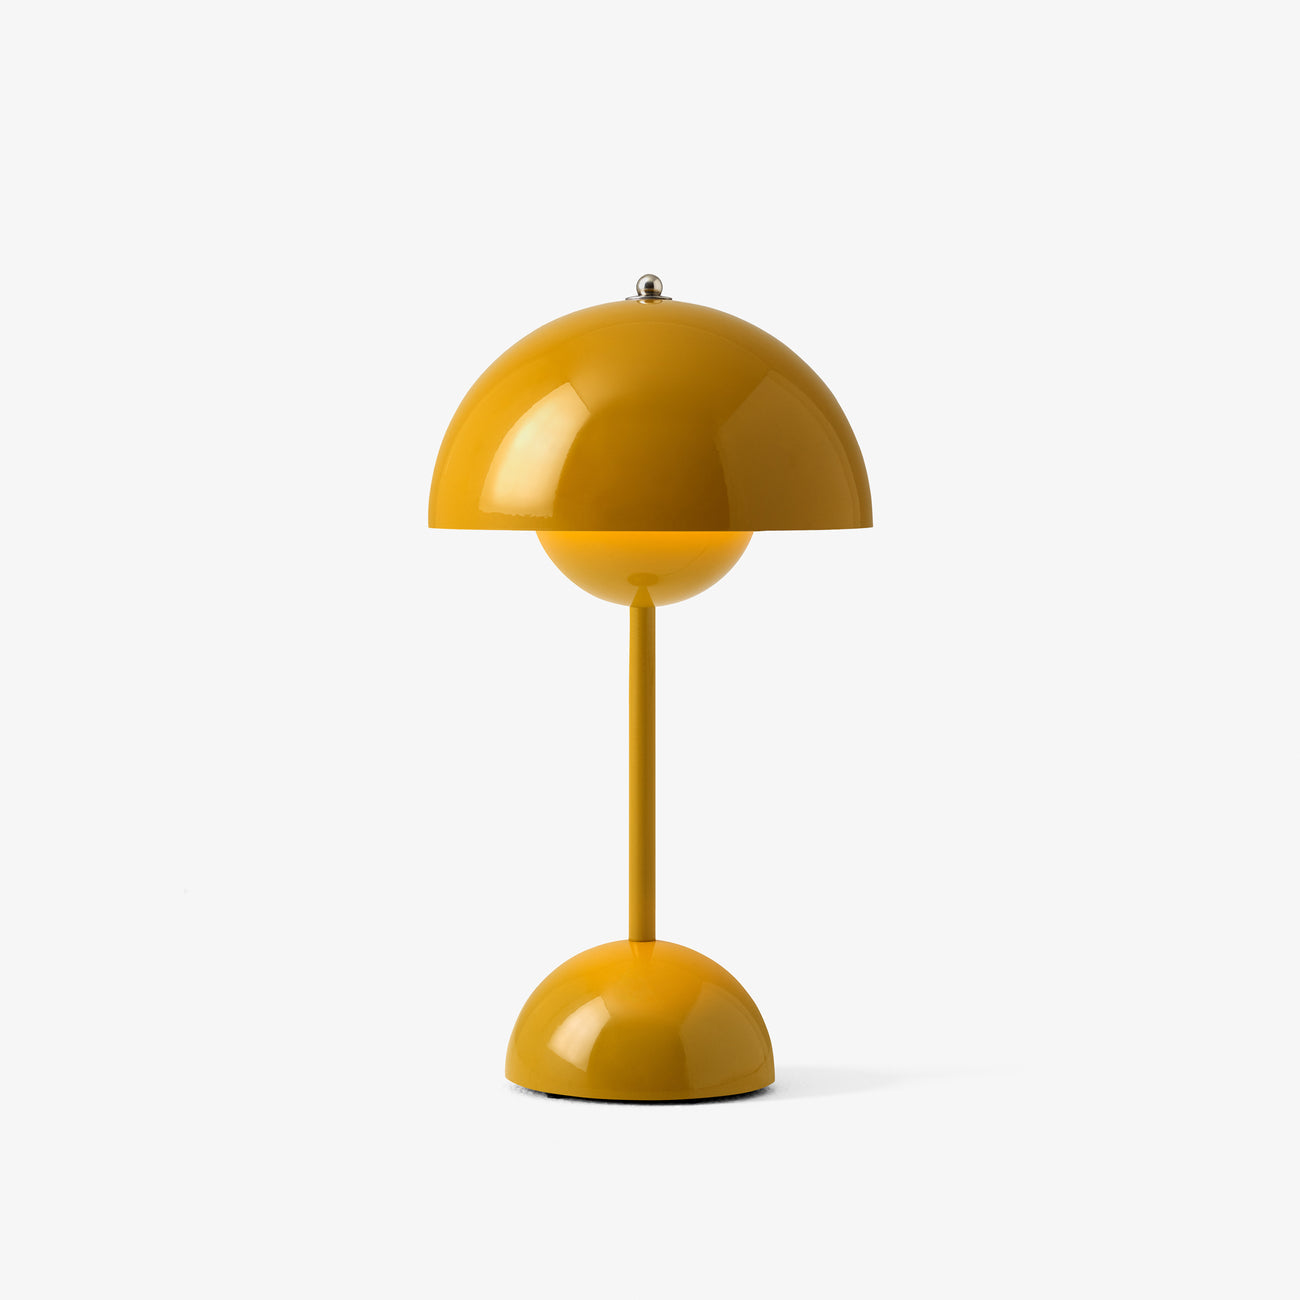 &Tradition - Flowerpot VP9 Portable Lamp - Mustard - Space Camp